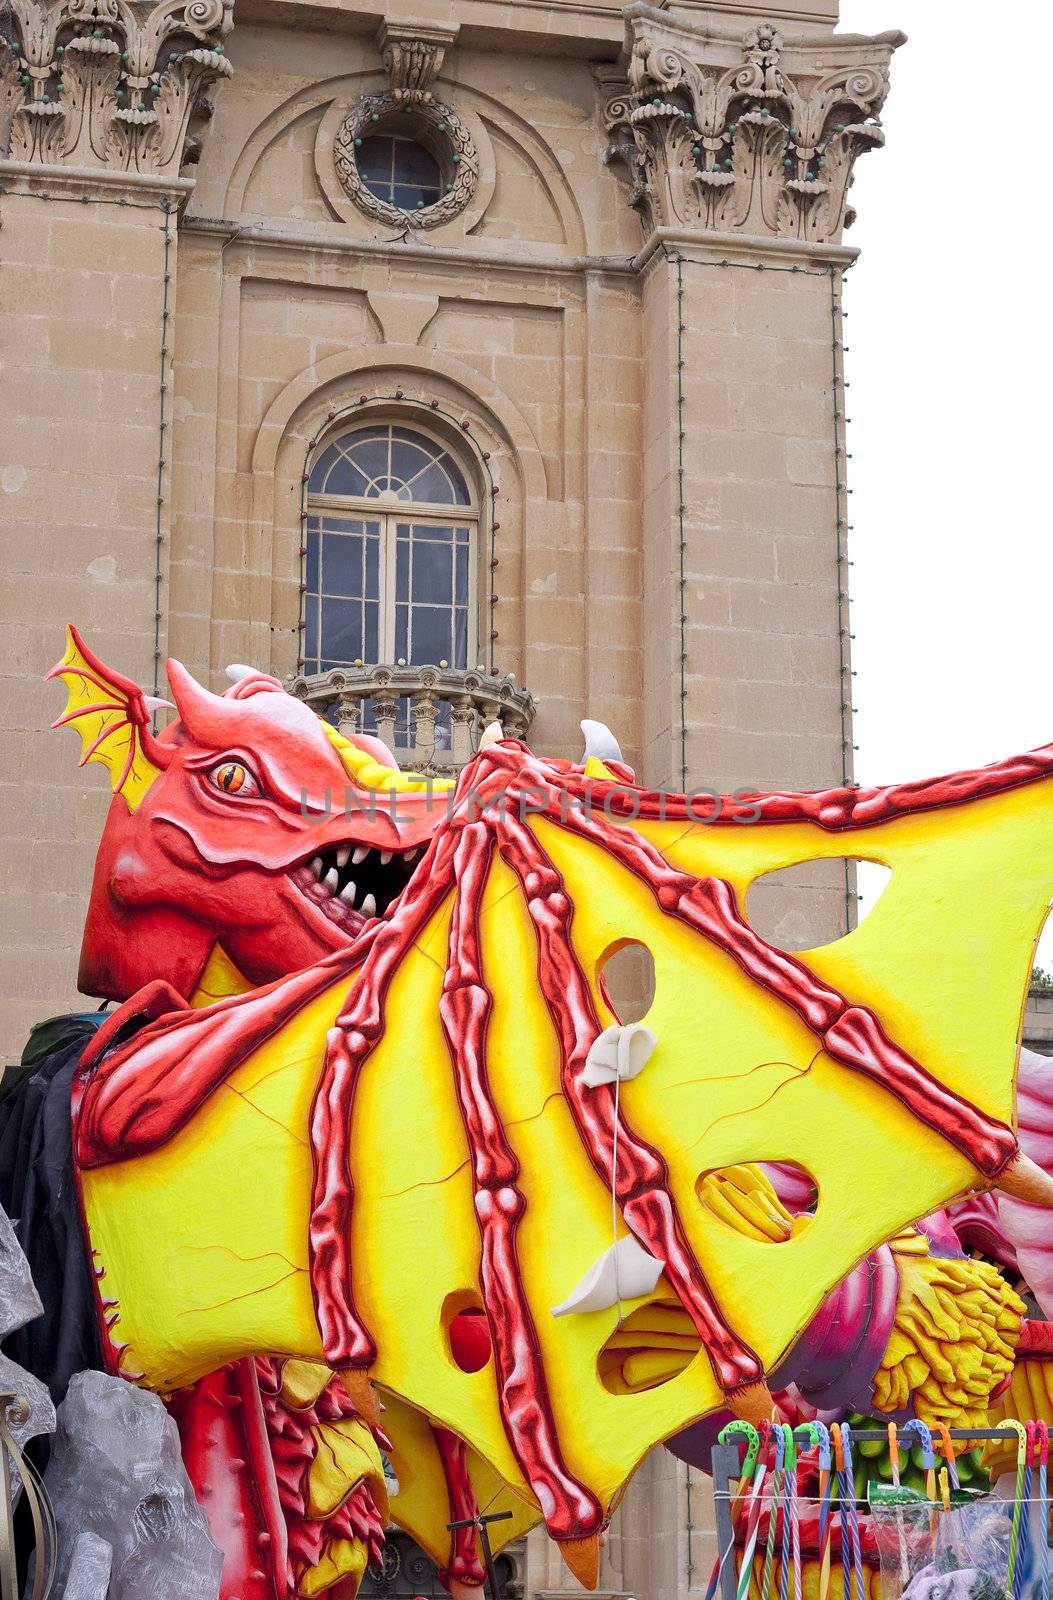 A colorful dragon made out of papier mache used during carnival festivities in Malta